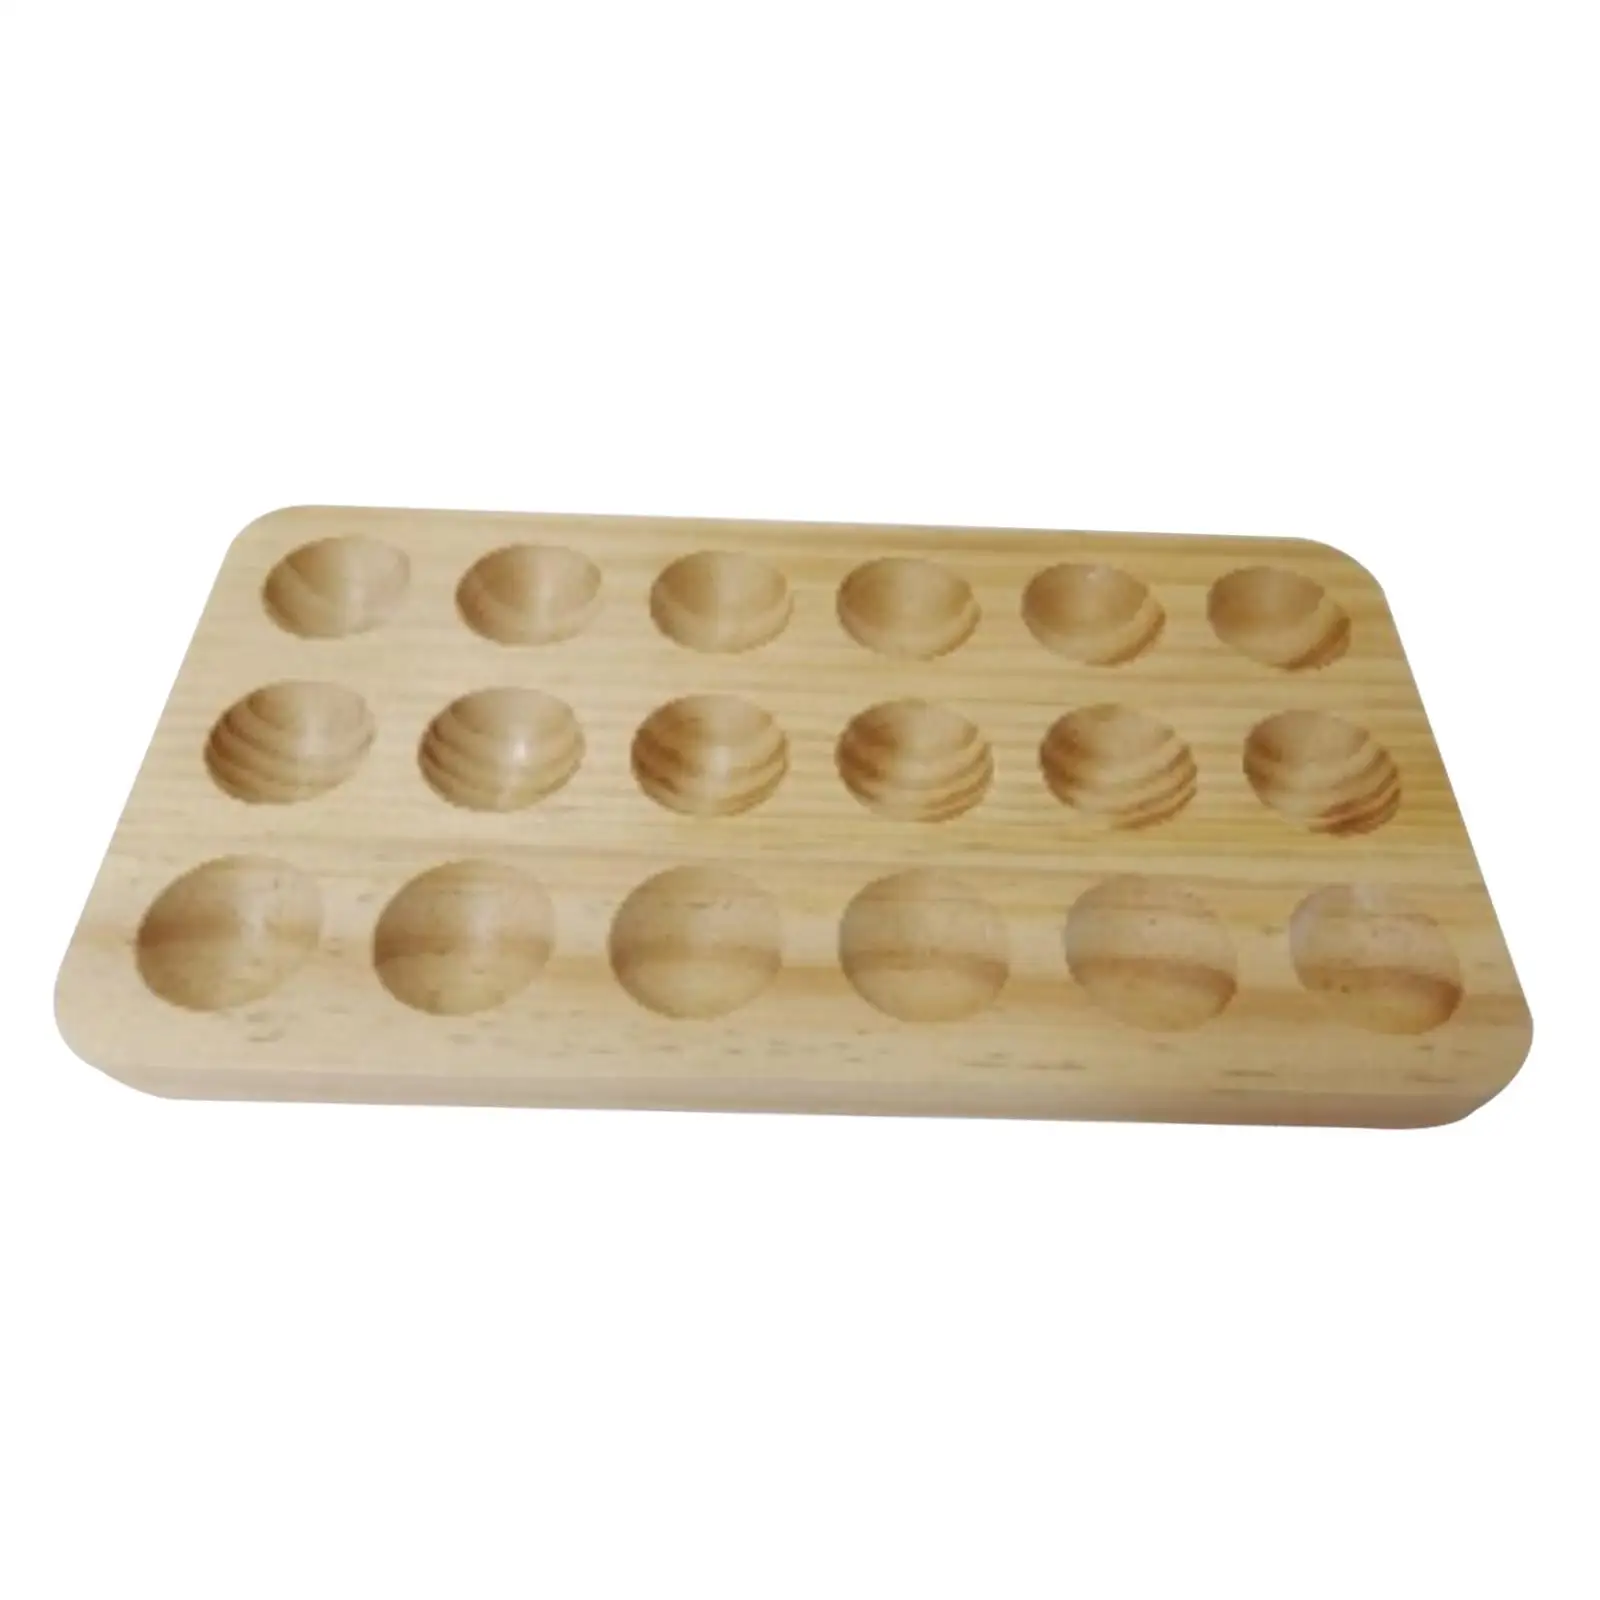 Wooden Egg Tray 18 Holes Reusable Egg Cartons Eggs Organizers Egg Containers for Countertop Kitchen Drawer Cabinet Refrigerator